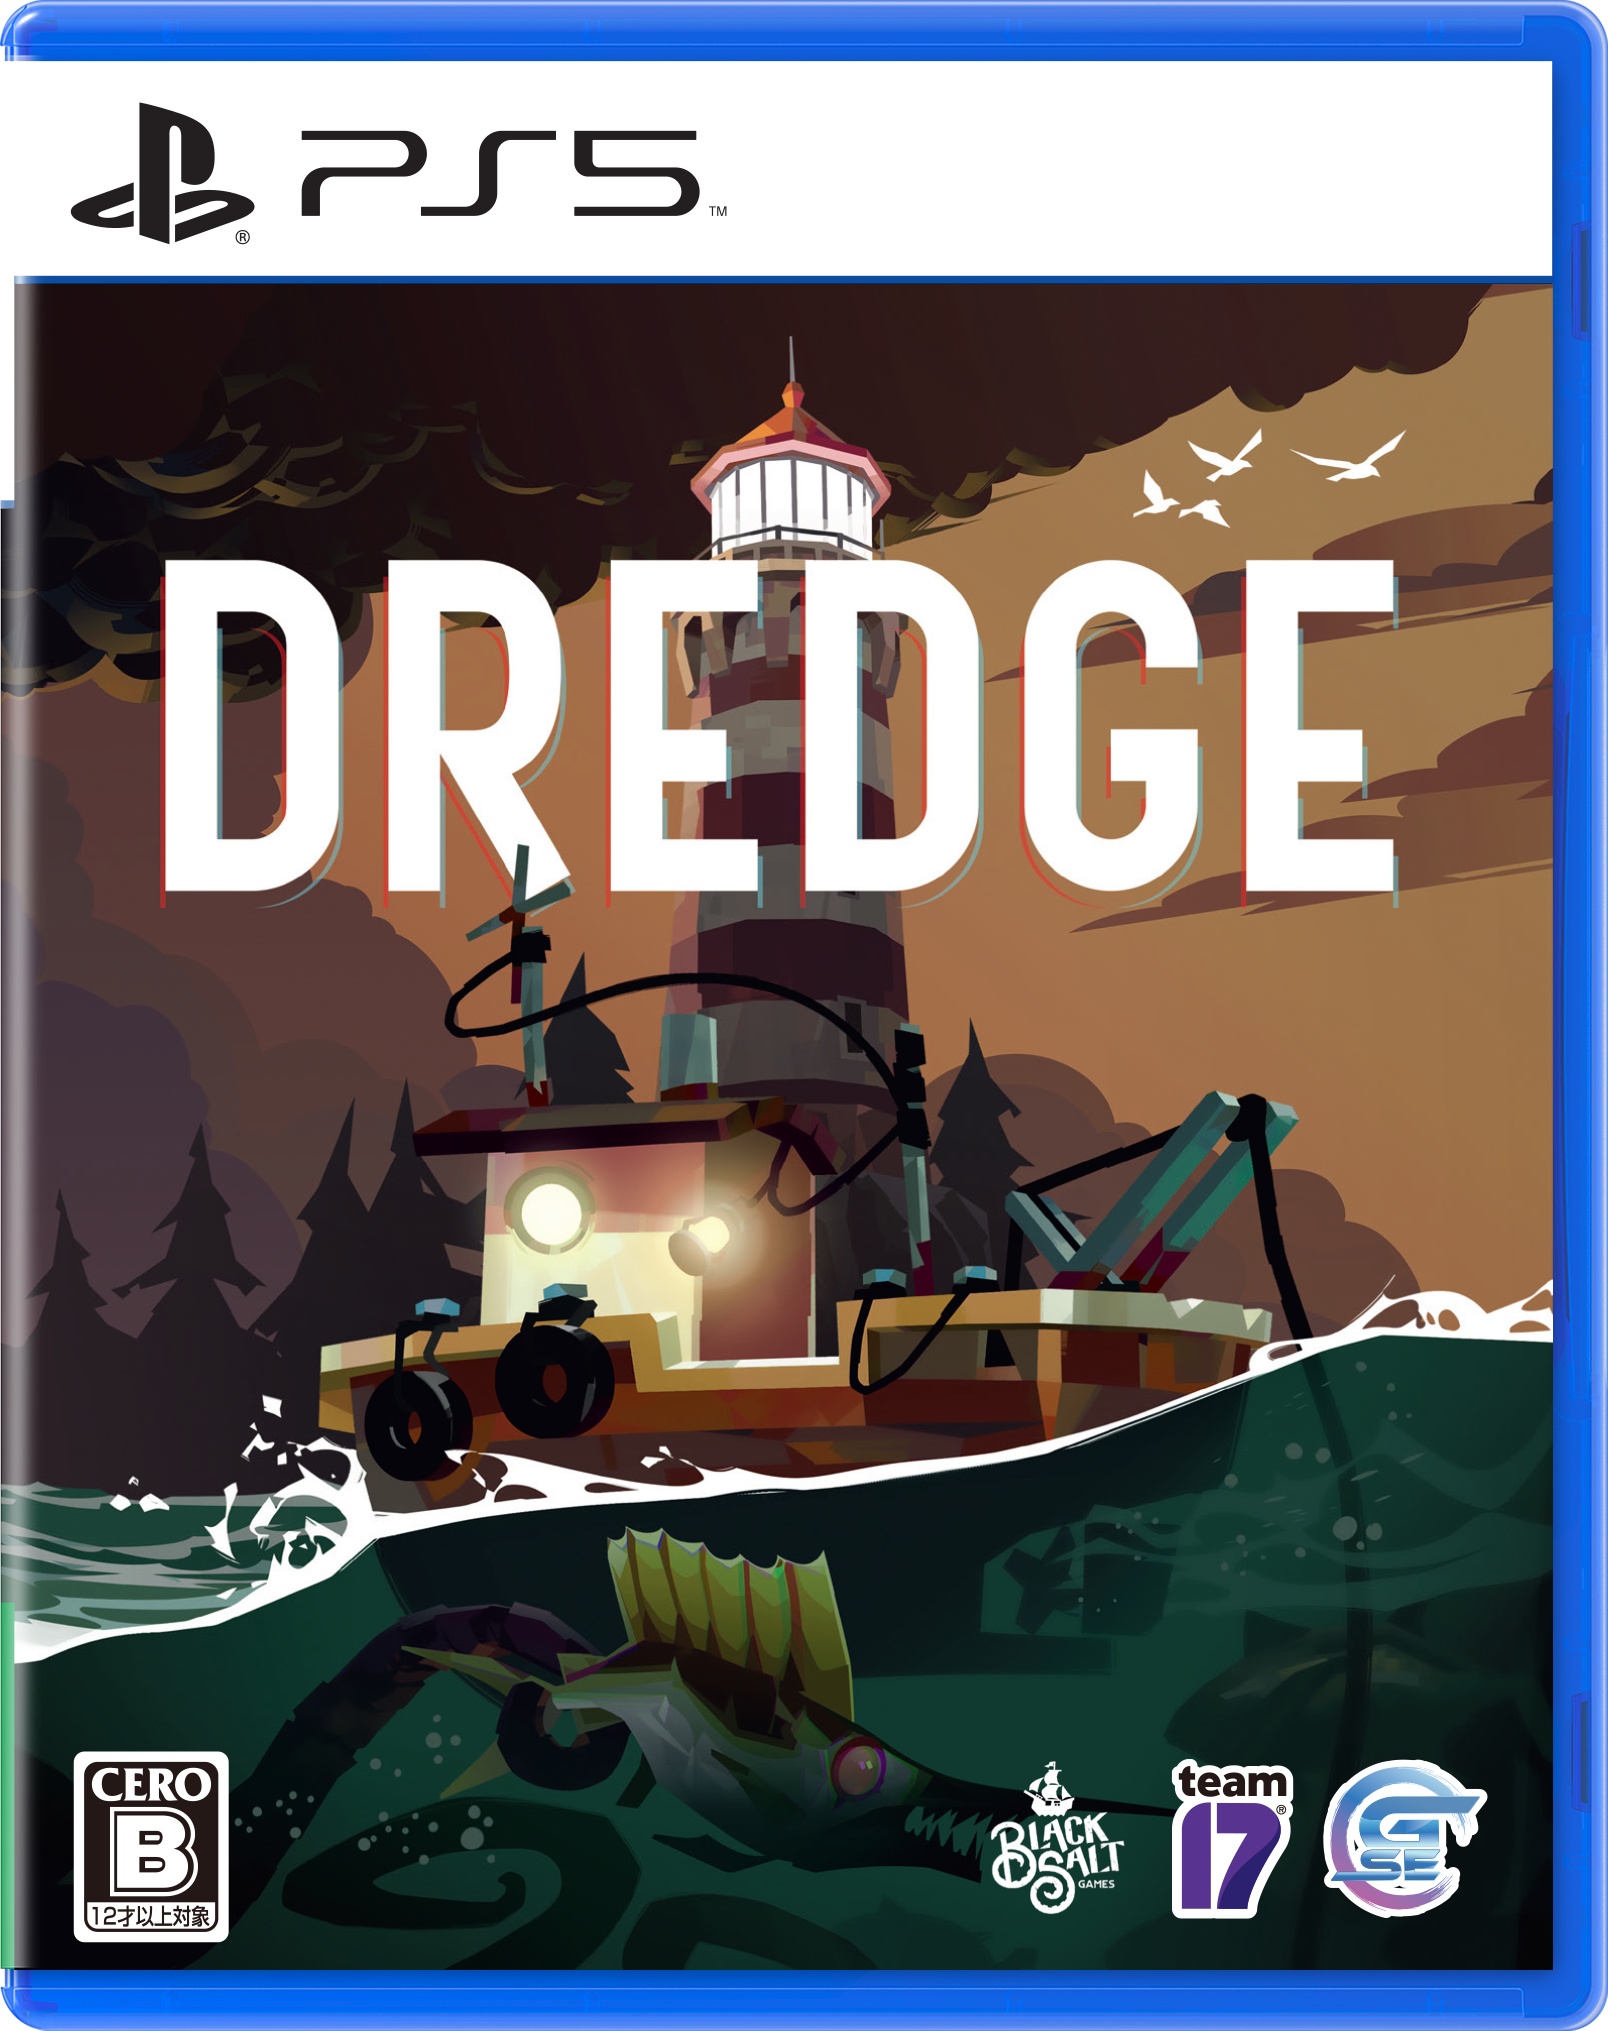 Fishing adventure game DREDGE is officially released today! Pick up your  fishing rod and explore the mysteries of the deep sea now!